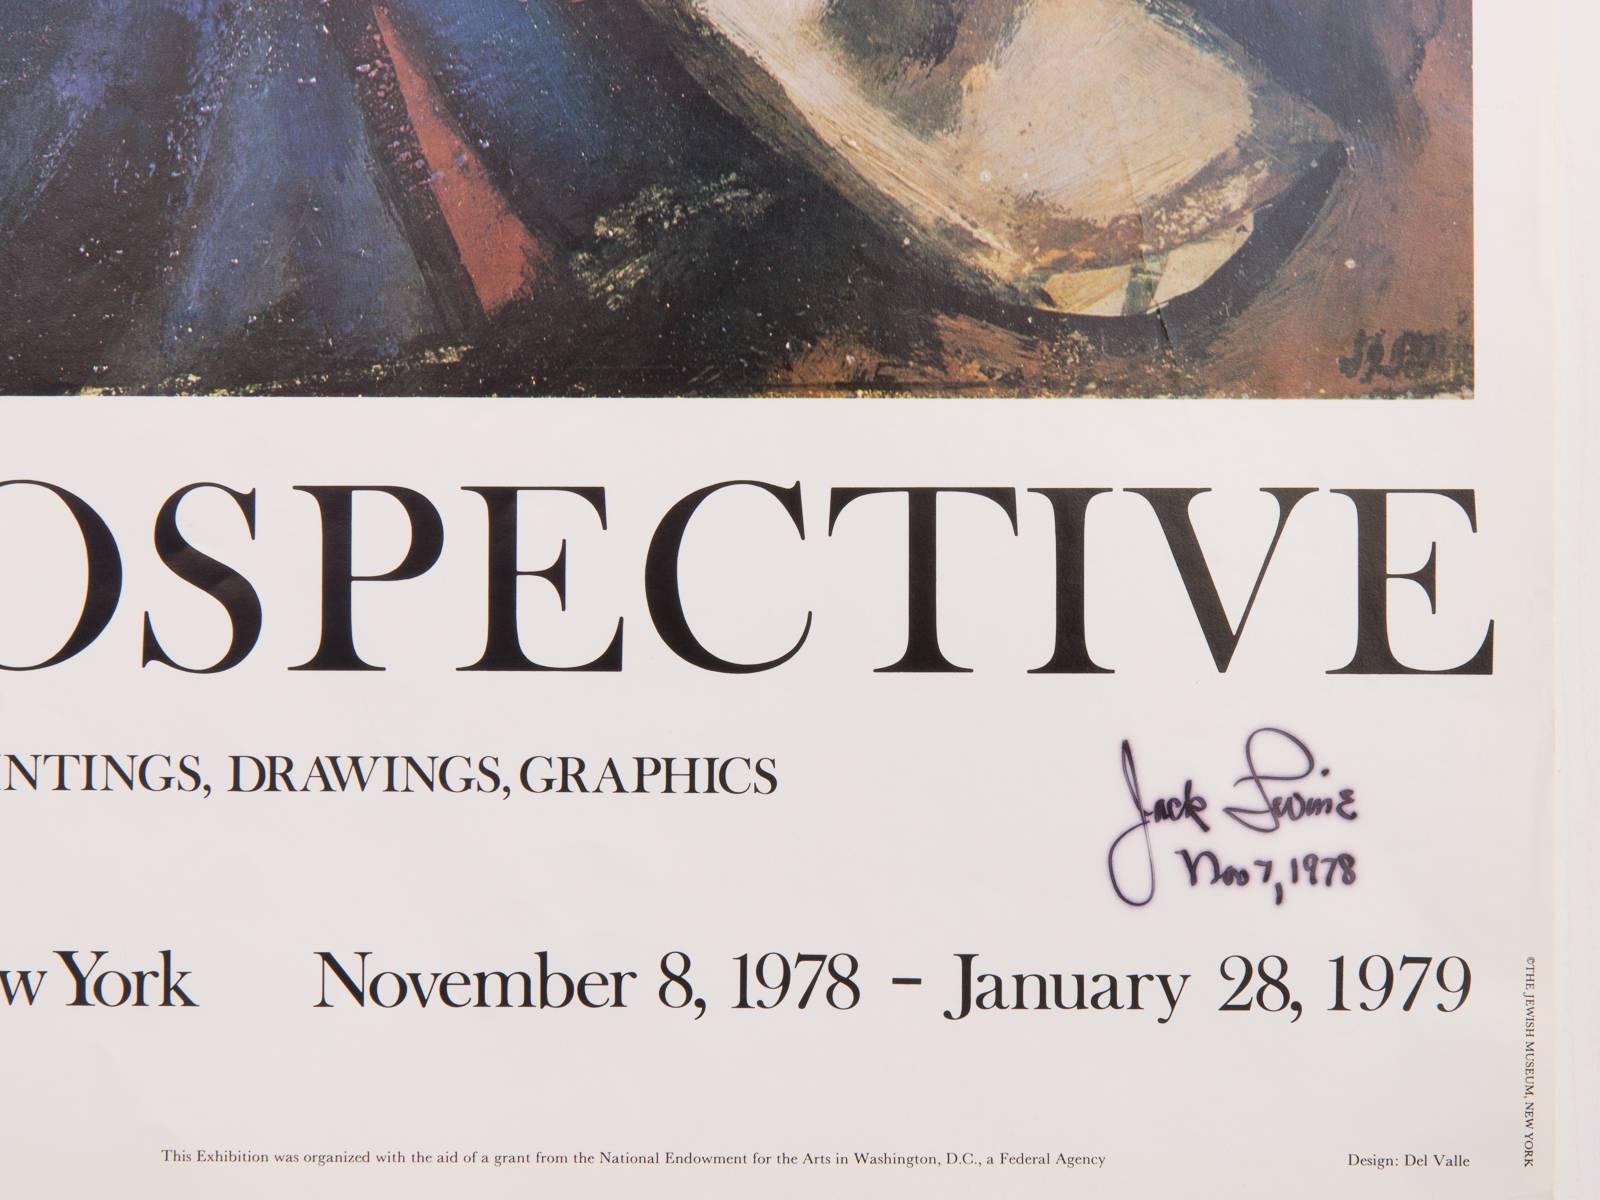 Poster dates to 1978 retrospective at the Jewish Museum, New York. Signed and dated November 7, 1978. 

Poster will ship in a gallery frame.

21.5